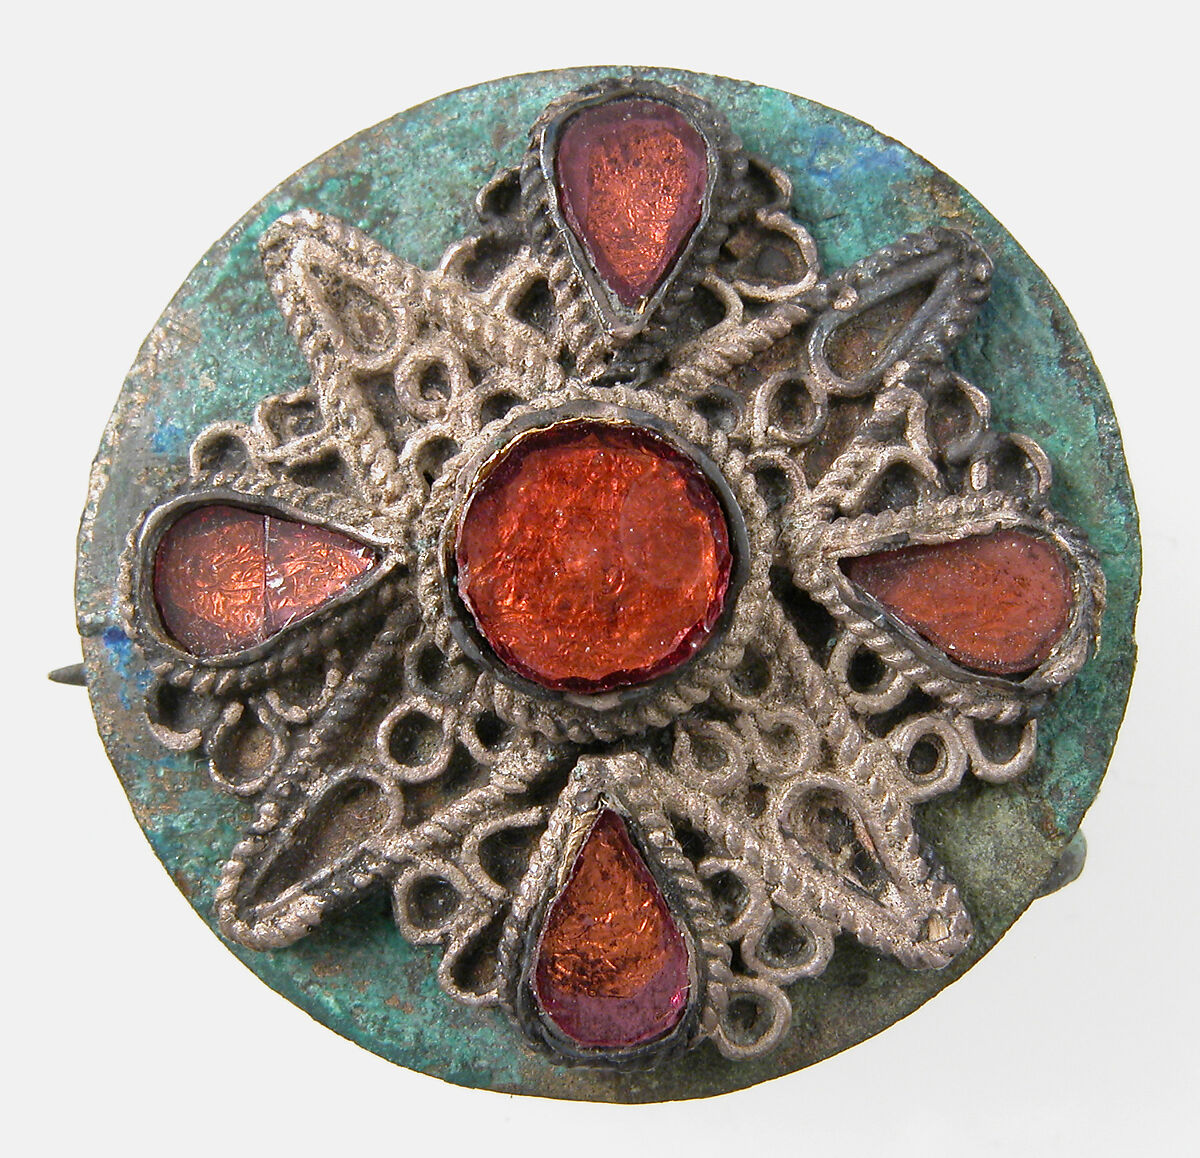 Disk Brooch, Copper alloy, silver wire, glass paste, Frankish or Northern French 